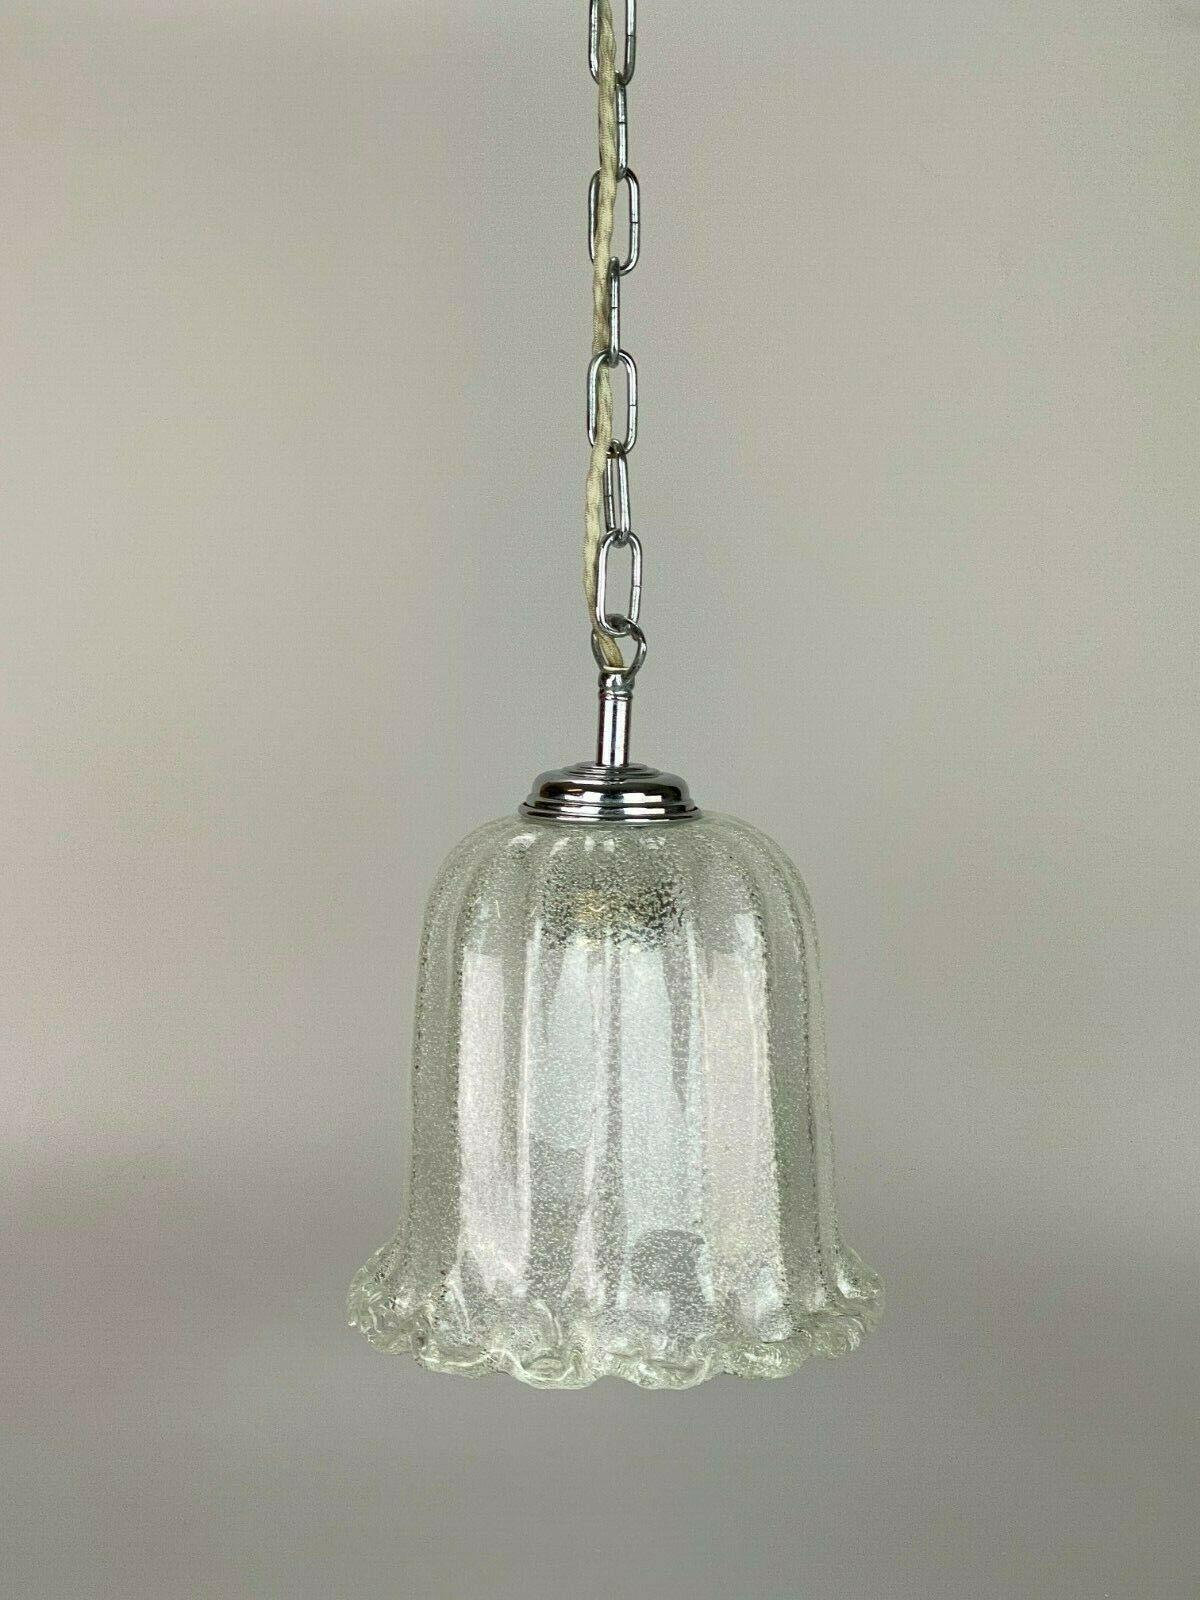 60s 70s Lamp Hanging Lamp Ball Lamp Bubble Chrome Glass Space Age Design In Good Condition For Sale In Neuenkirchen, NI